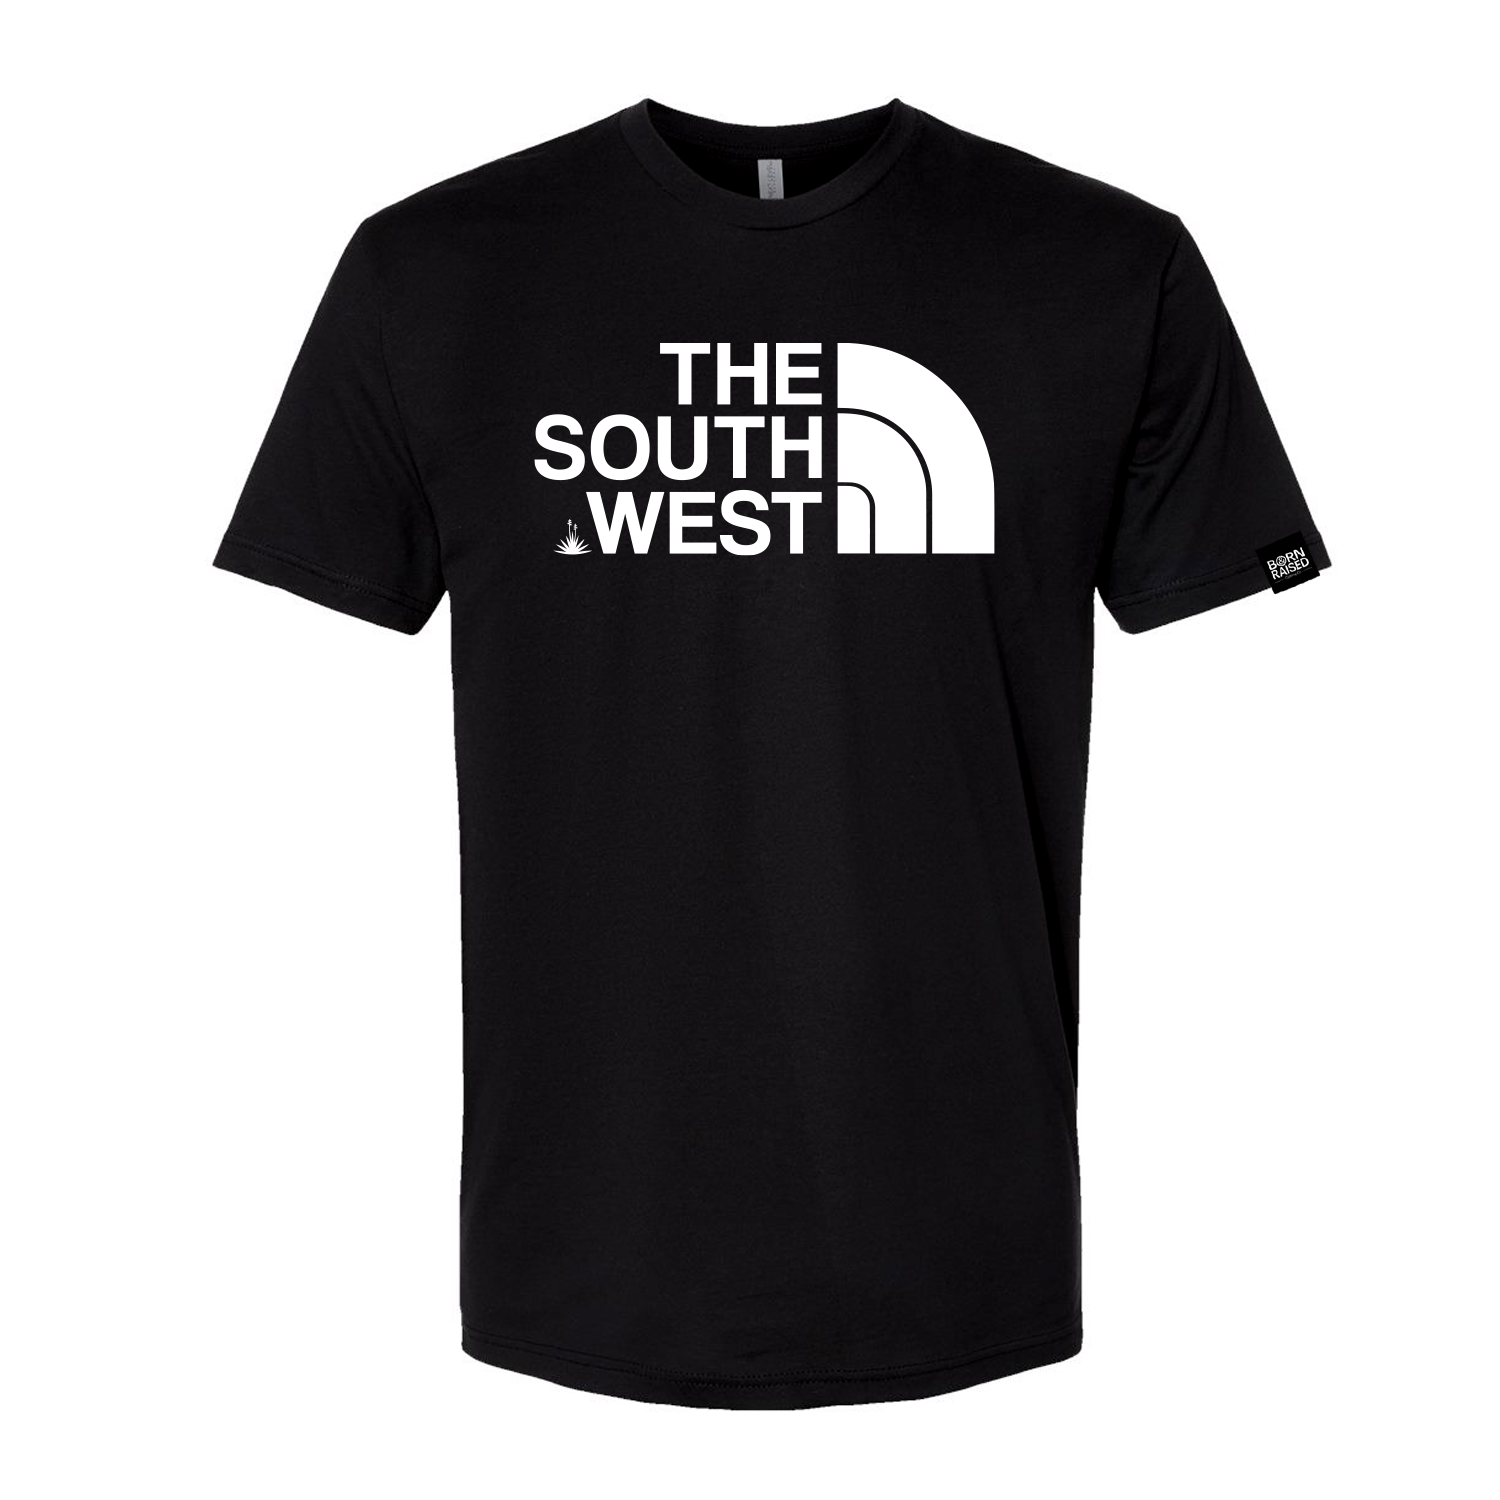 The South West Short sleeve tee